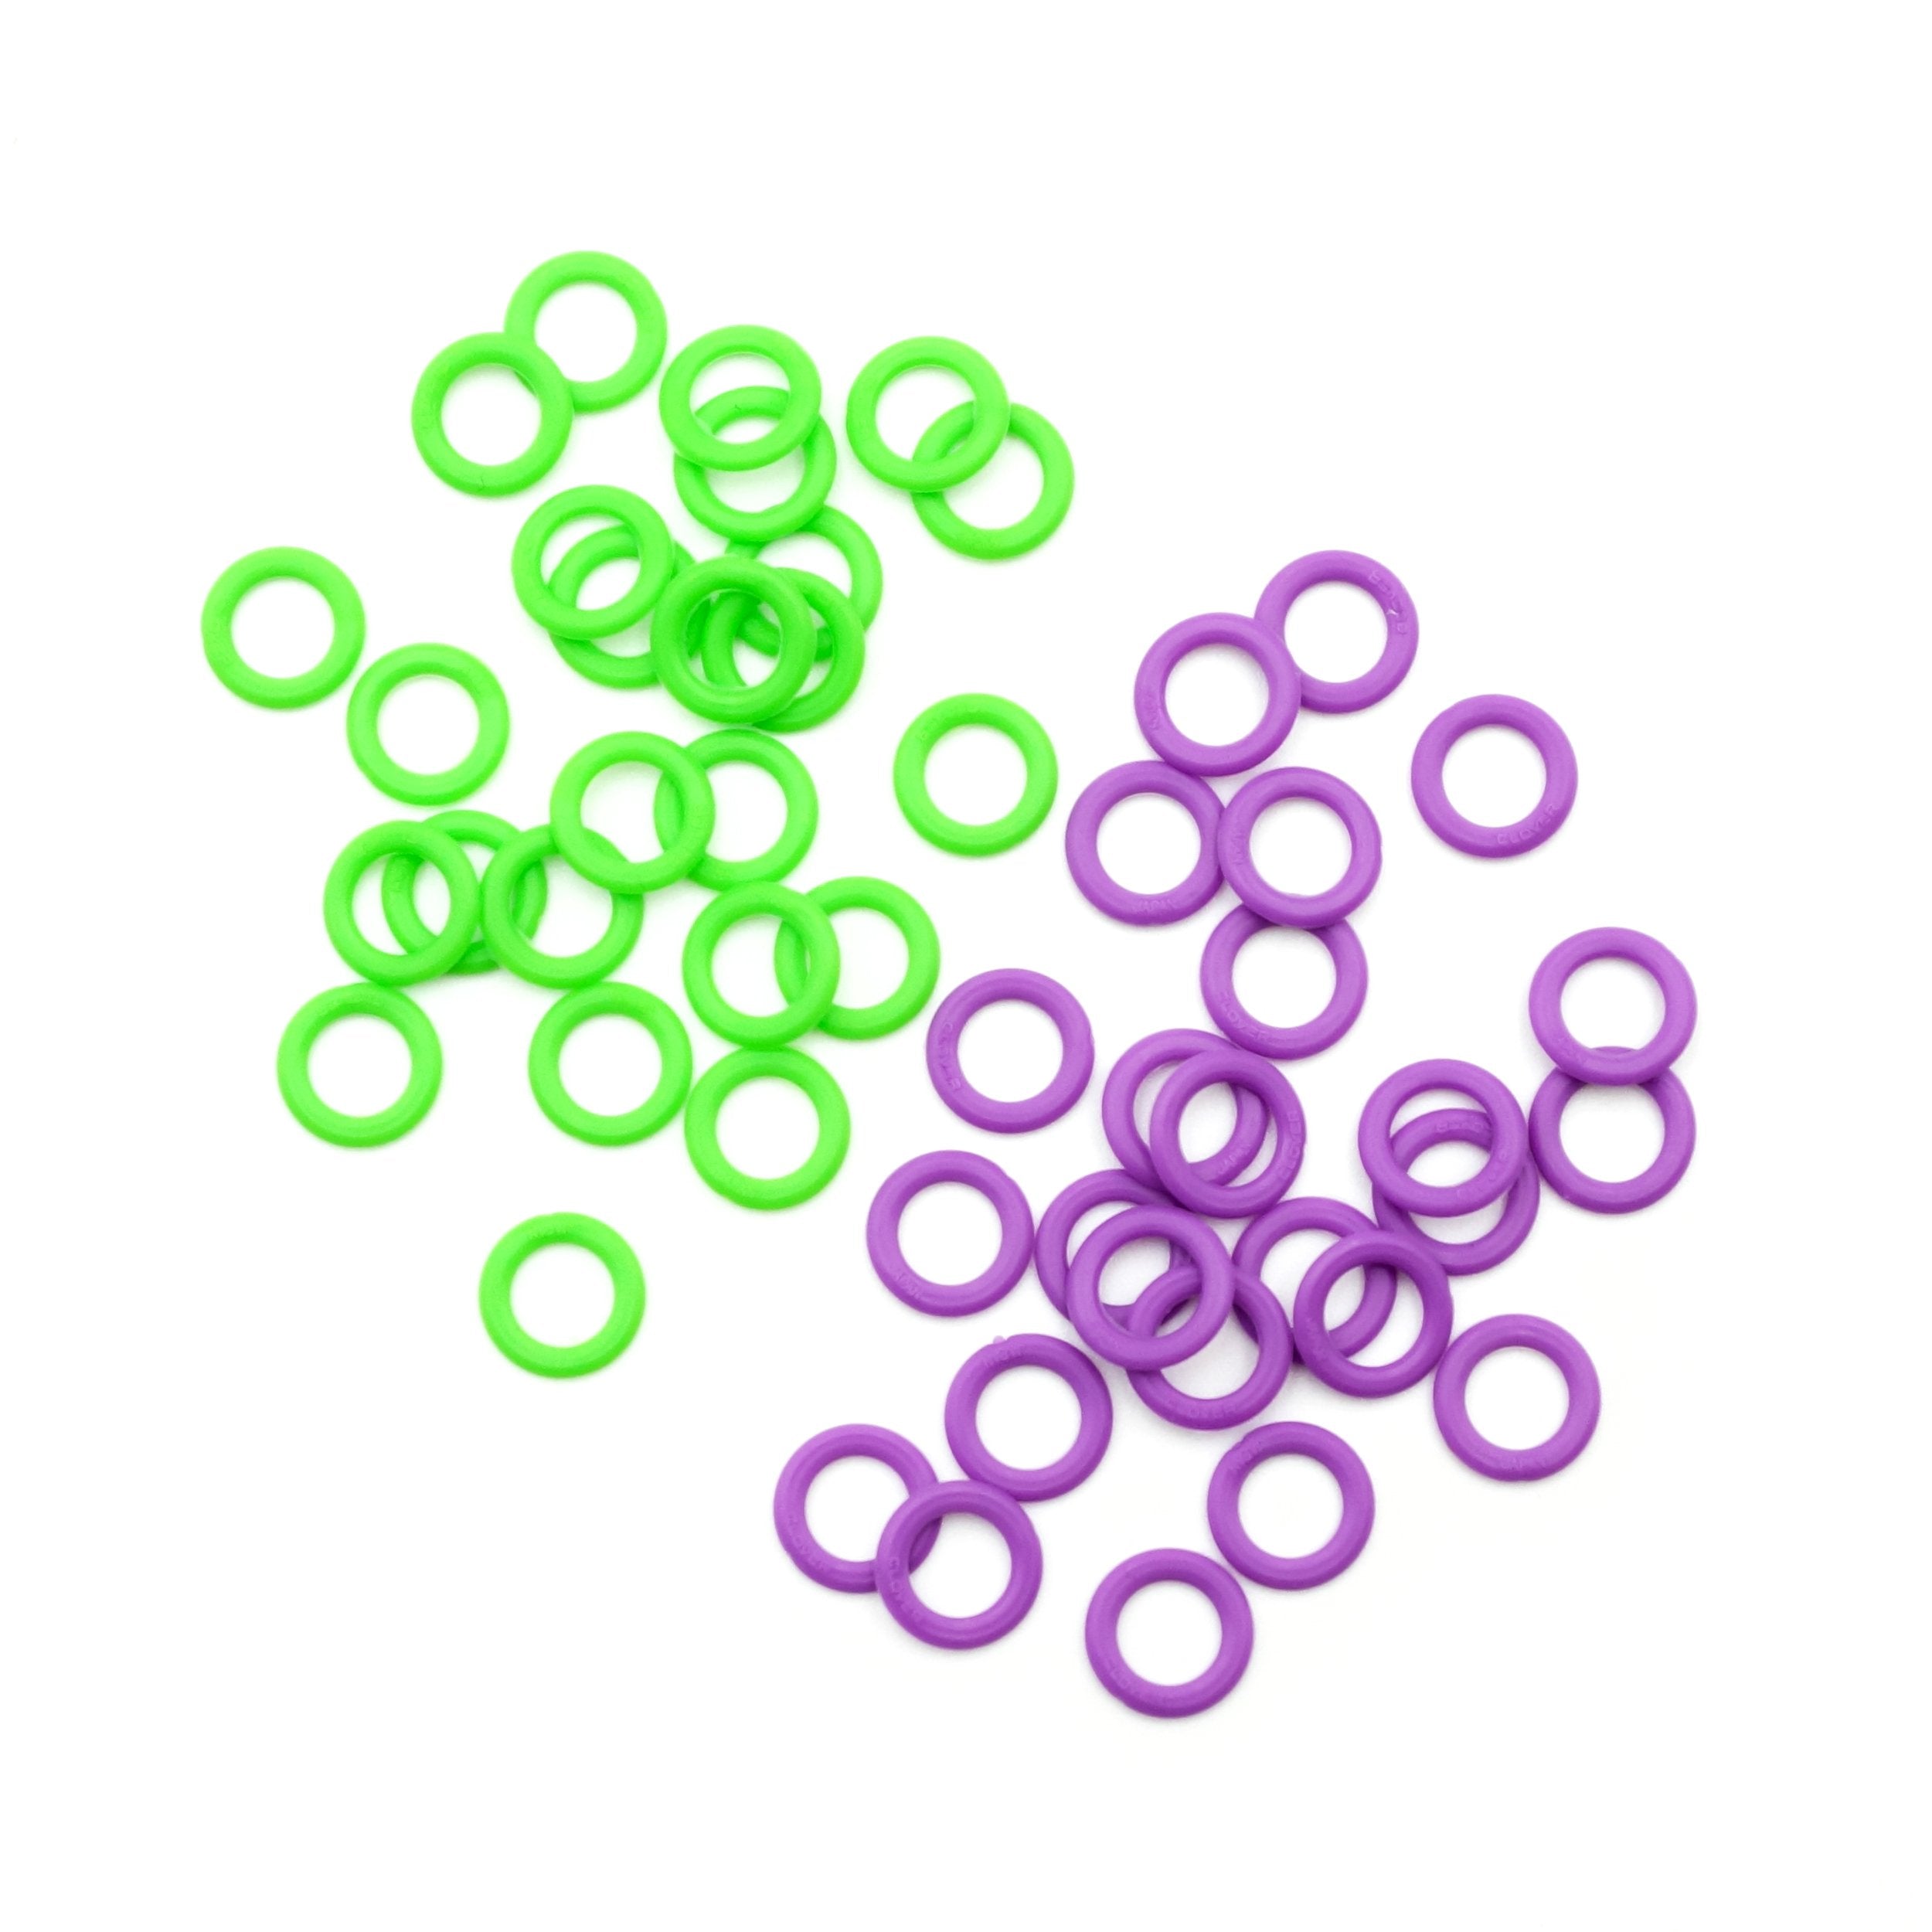 Clover Stitch Markers Ring and Locking Styles - 051221354359